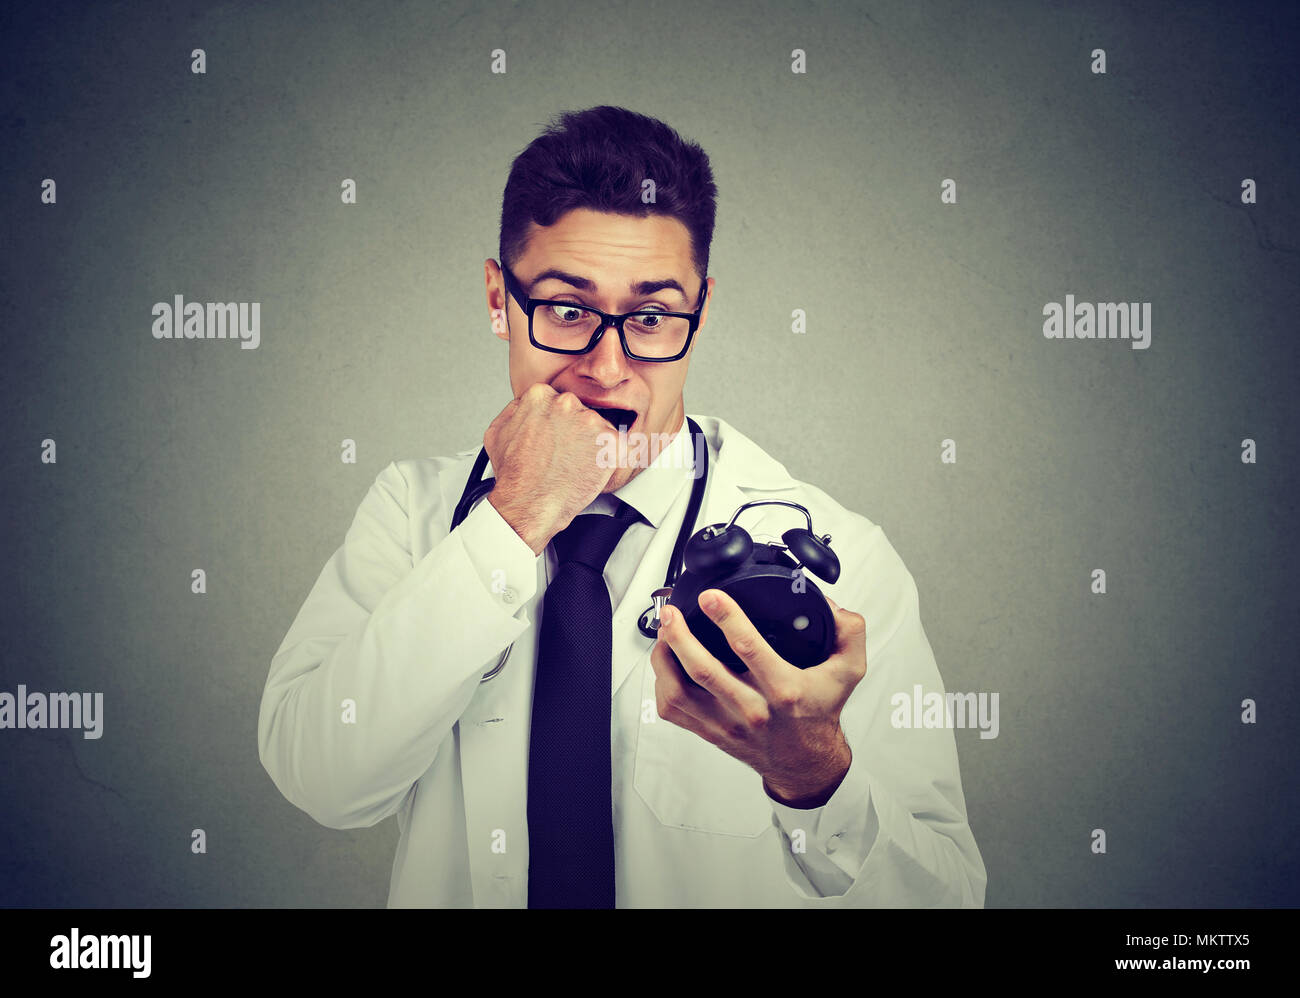 Stressed anxious doctor, health care professional holding alarm clock pressured by time isolated on gray background. Stock Photo